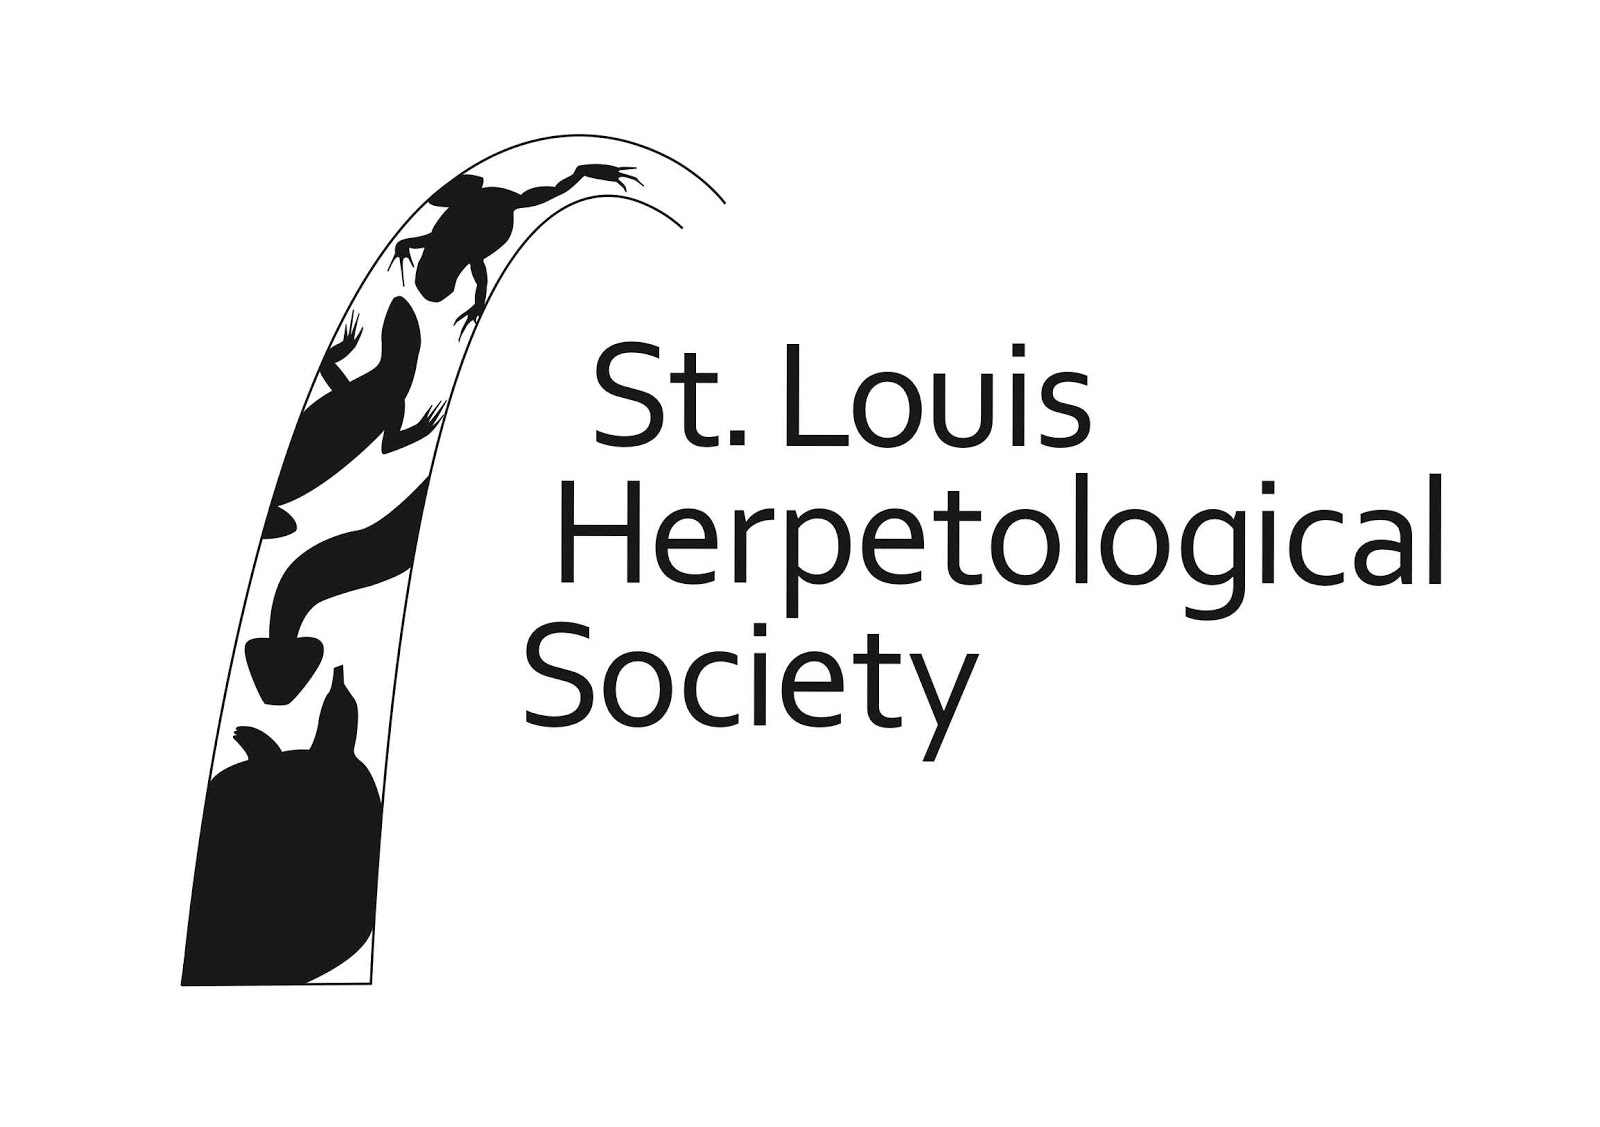 St. Louis Herpetological Society